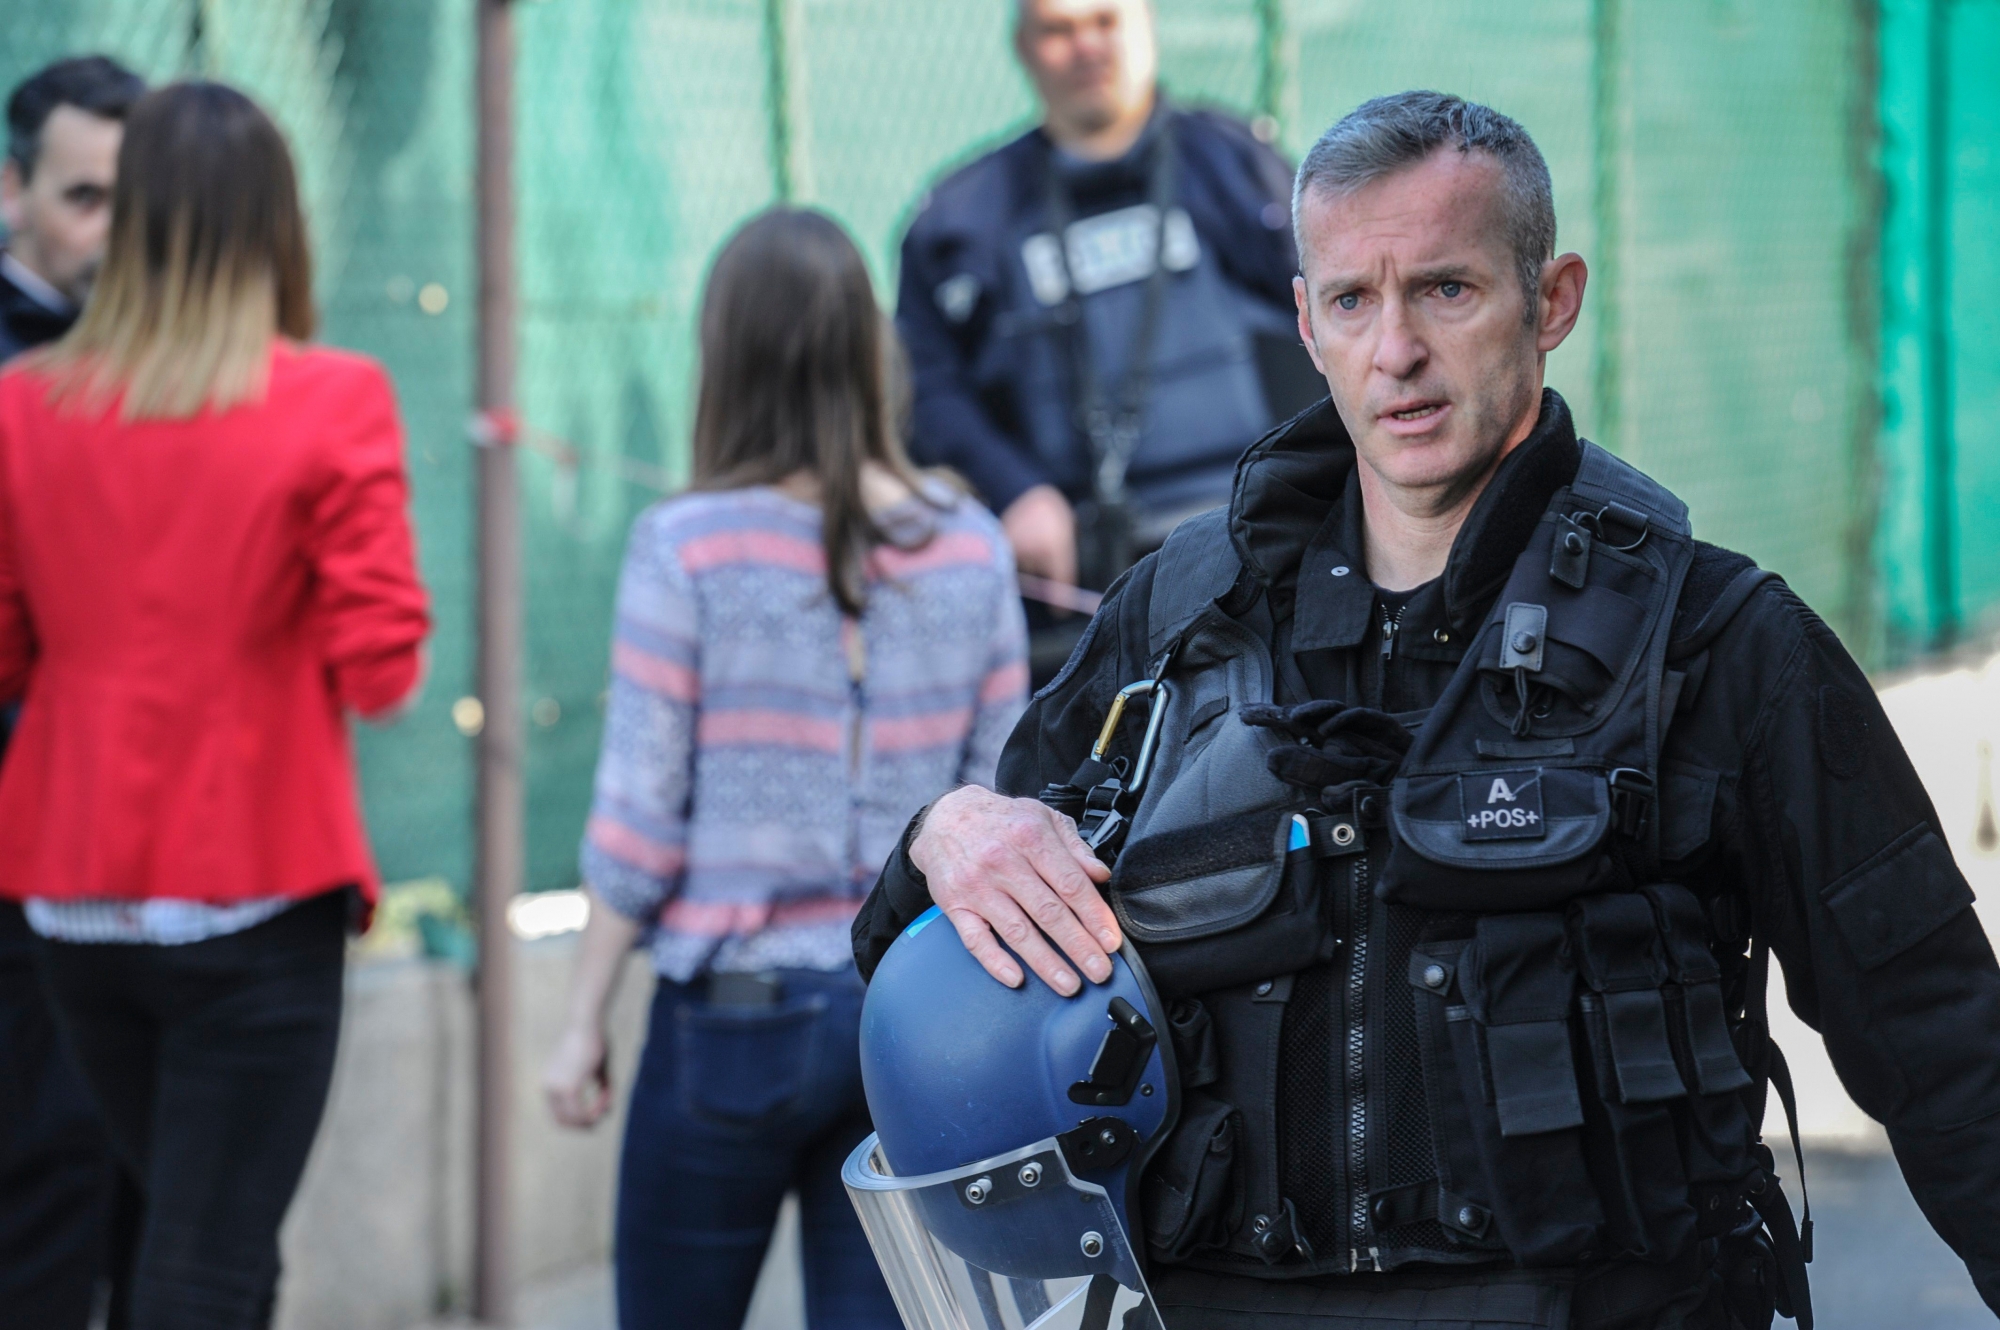 epa05852345 French police forces stand guard near the scene of a shooting at Lycee Alexis de Tocqueville school in Grasse, near Cannes, southern France, 16 March 2017. According to reports, several people were injured after at least one man opened fire in the Lycee Alexis de Tocqueville school. French authorities issued a terror alert in line with the country having been under a state of emergency since 18 months.  EPA/OLIVIER ANRIGO FRANCE CRIME SCHOOL SHOOTING